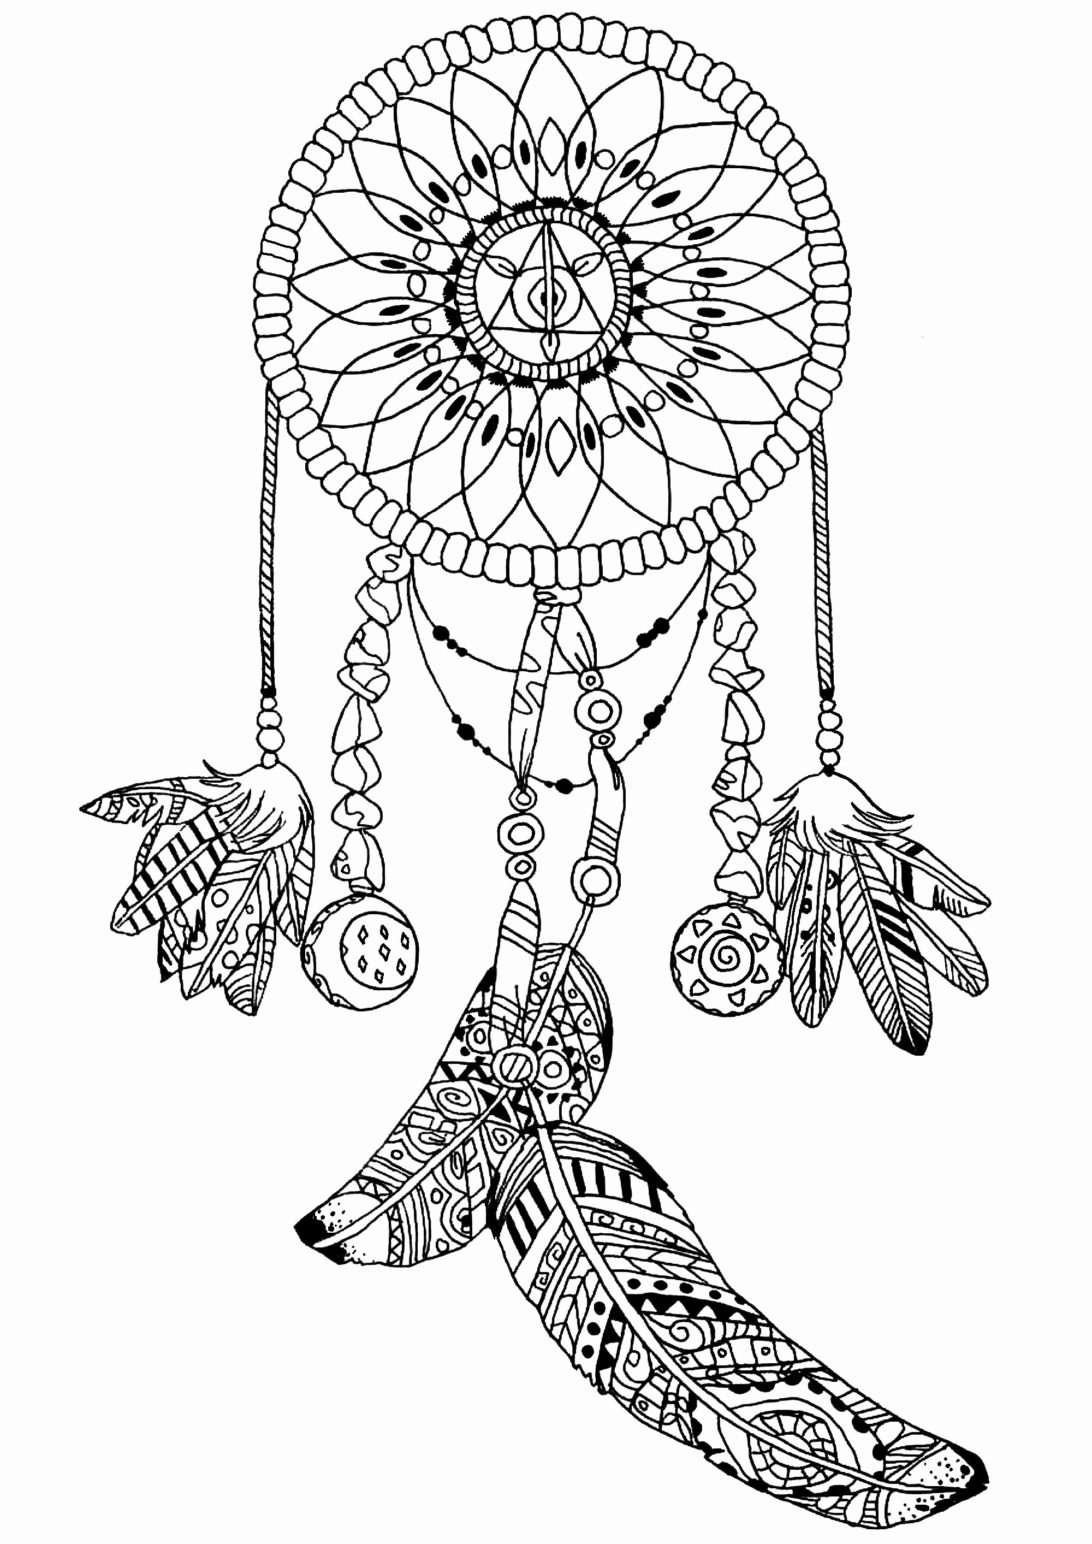 Zen Coloring Pages Coloring Home